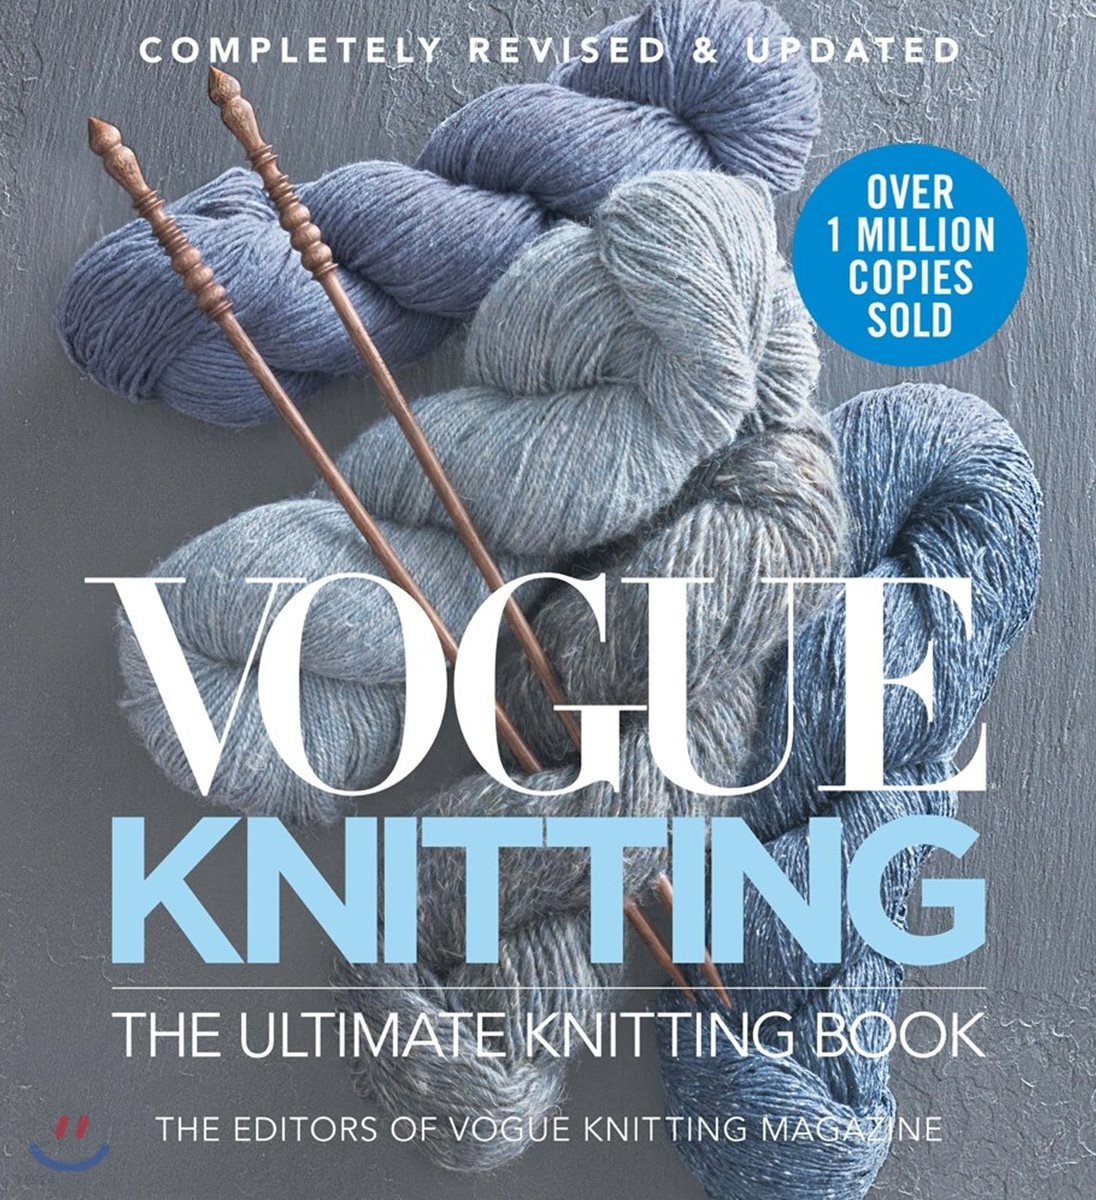 Vogue Knitting the Ultimate Knitting Book: Completely Revised & Updated (Completely Revised & Updated)